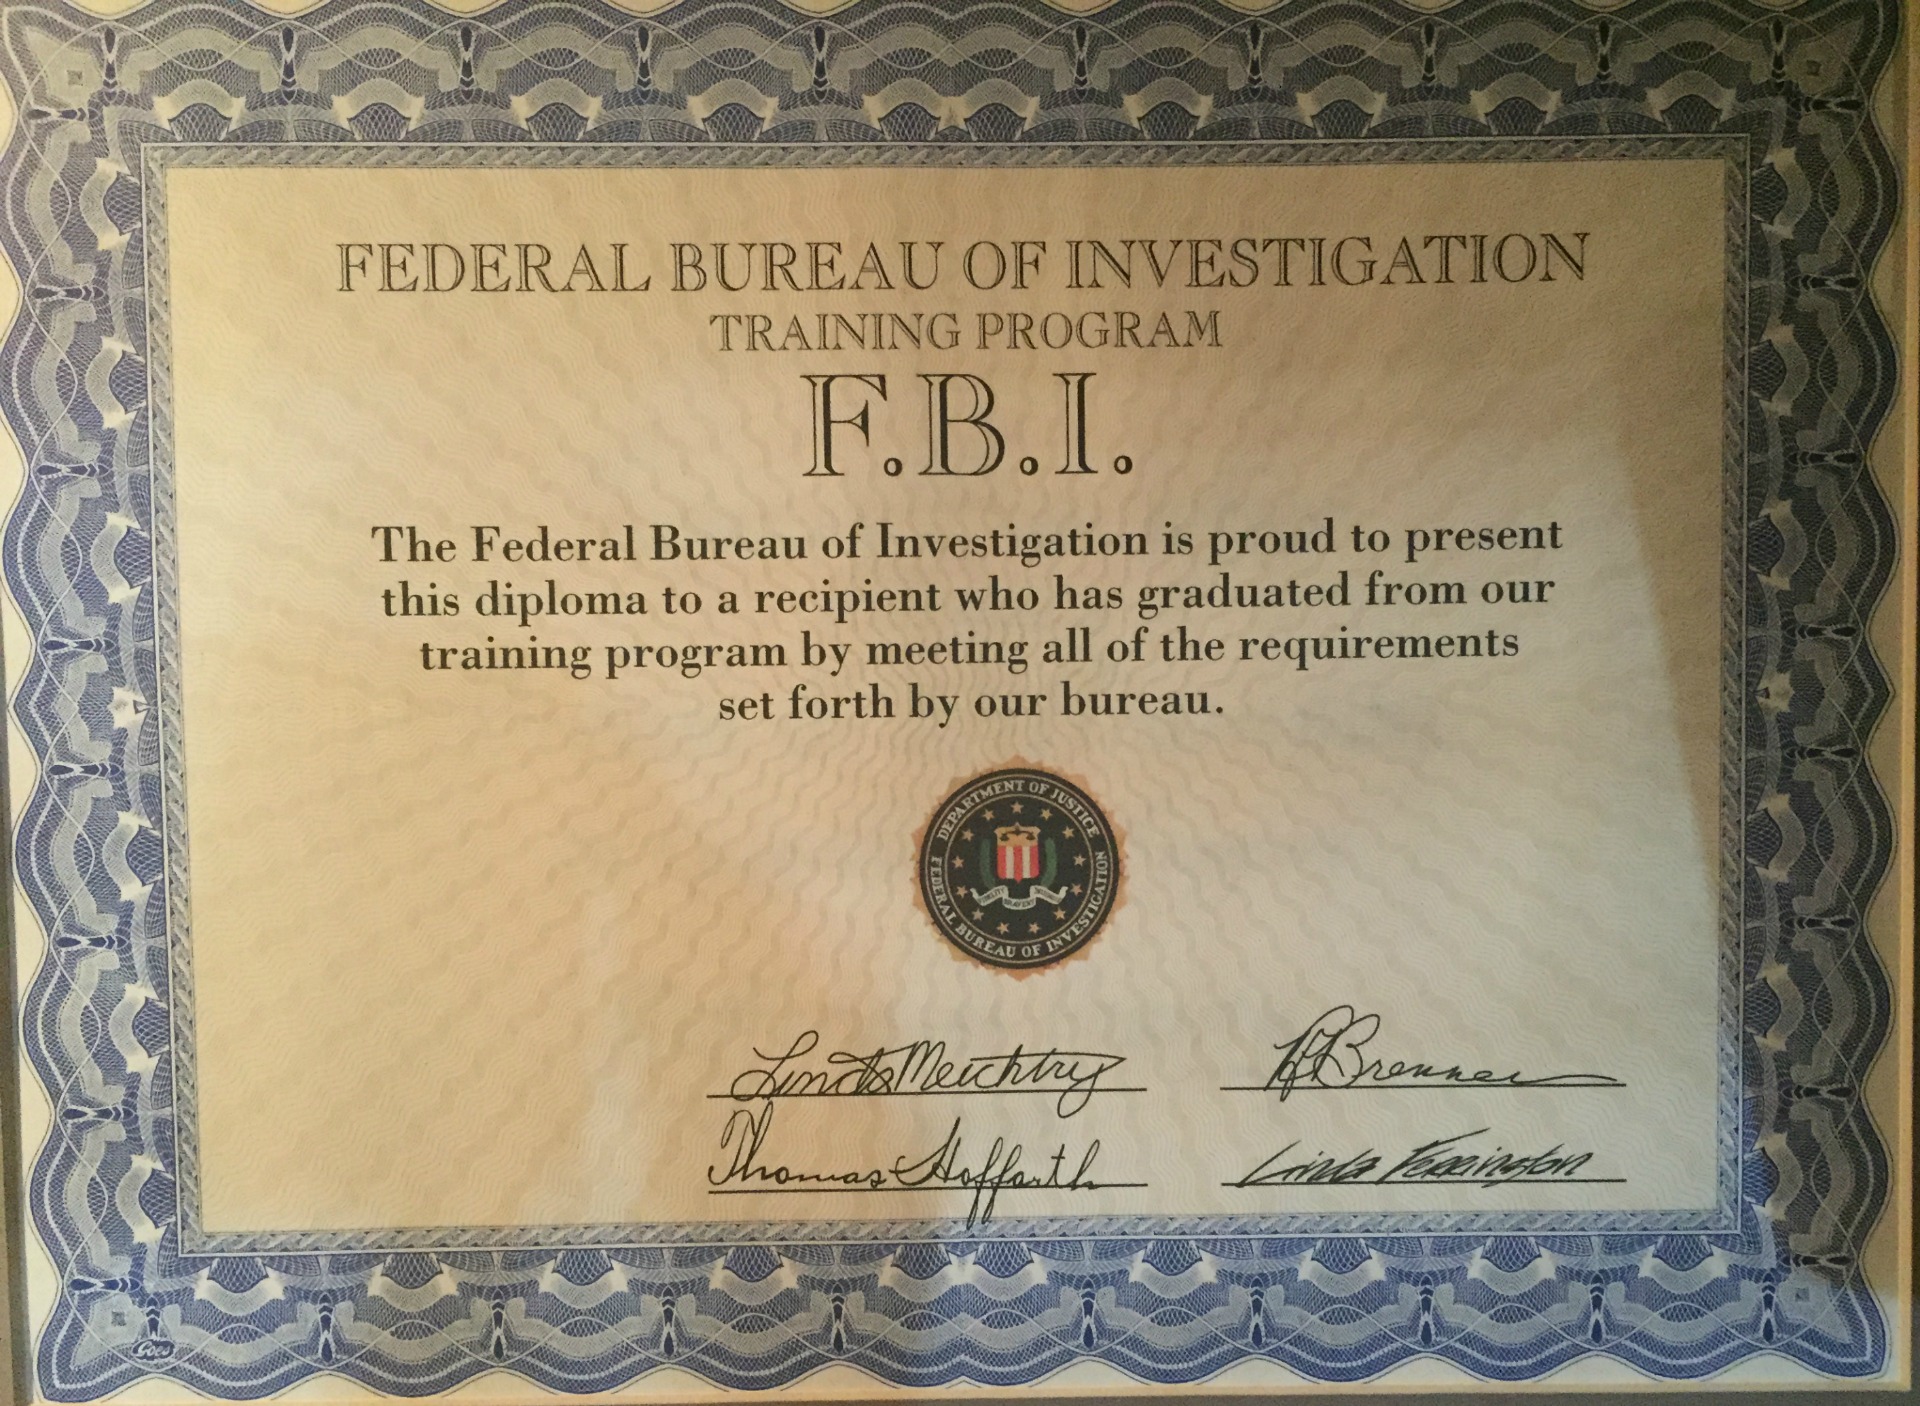 Welcome to the Federal Bureau of Investigation